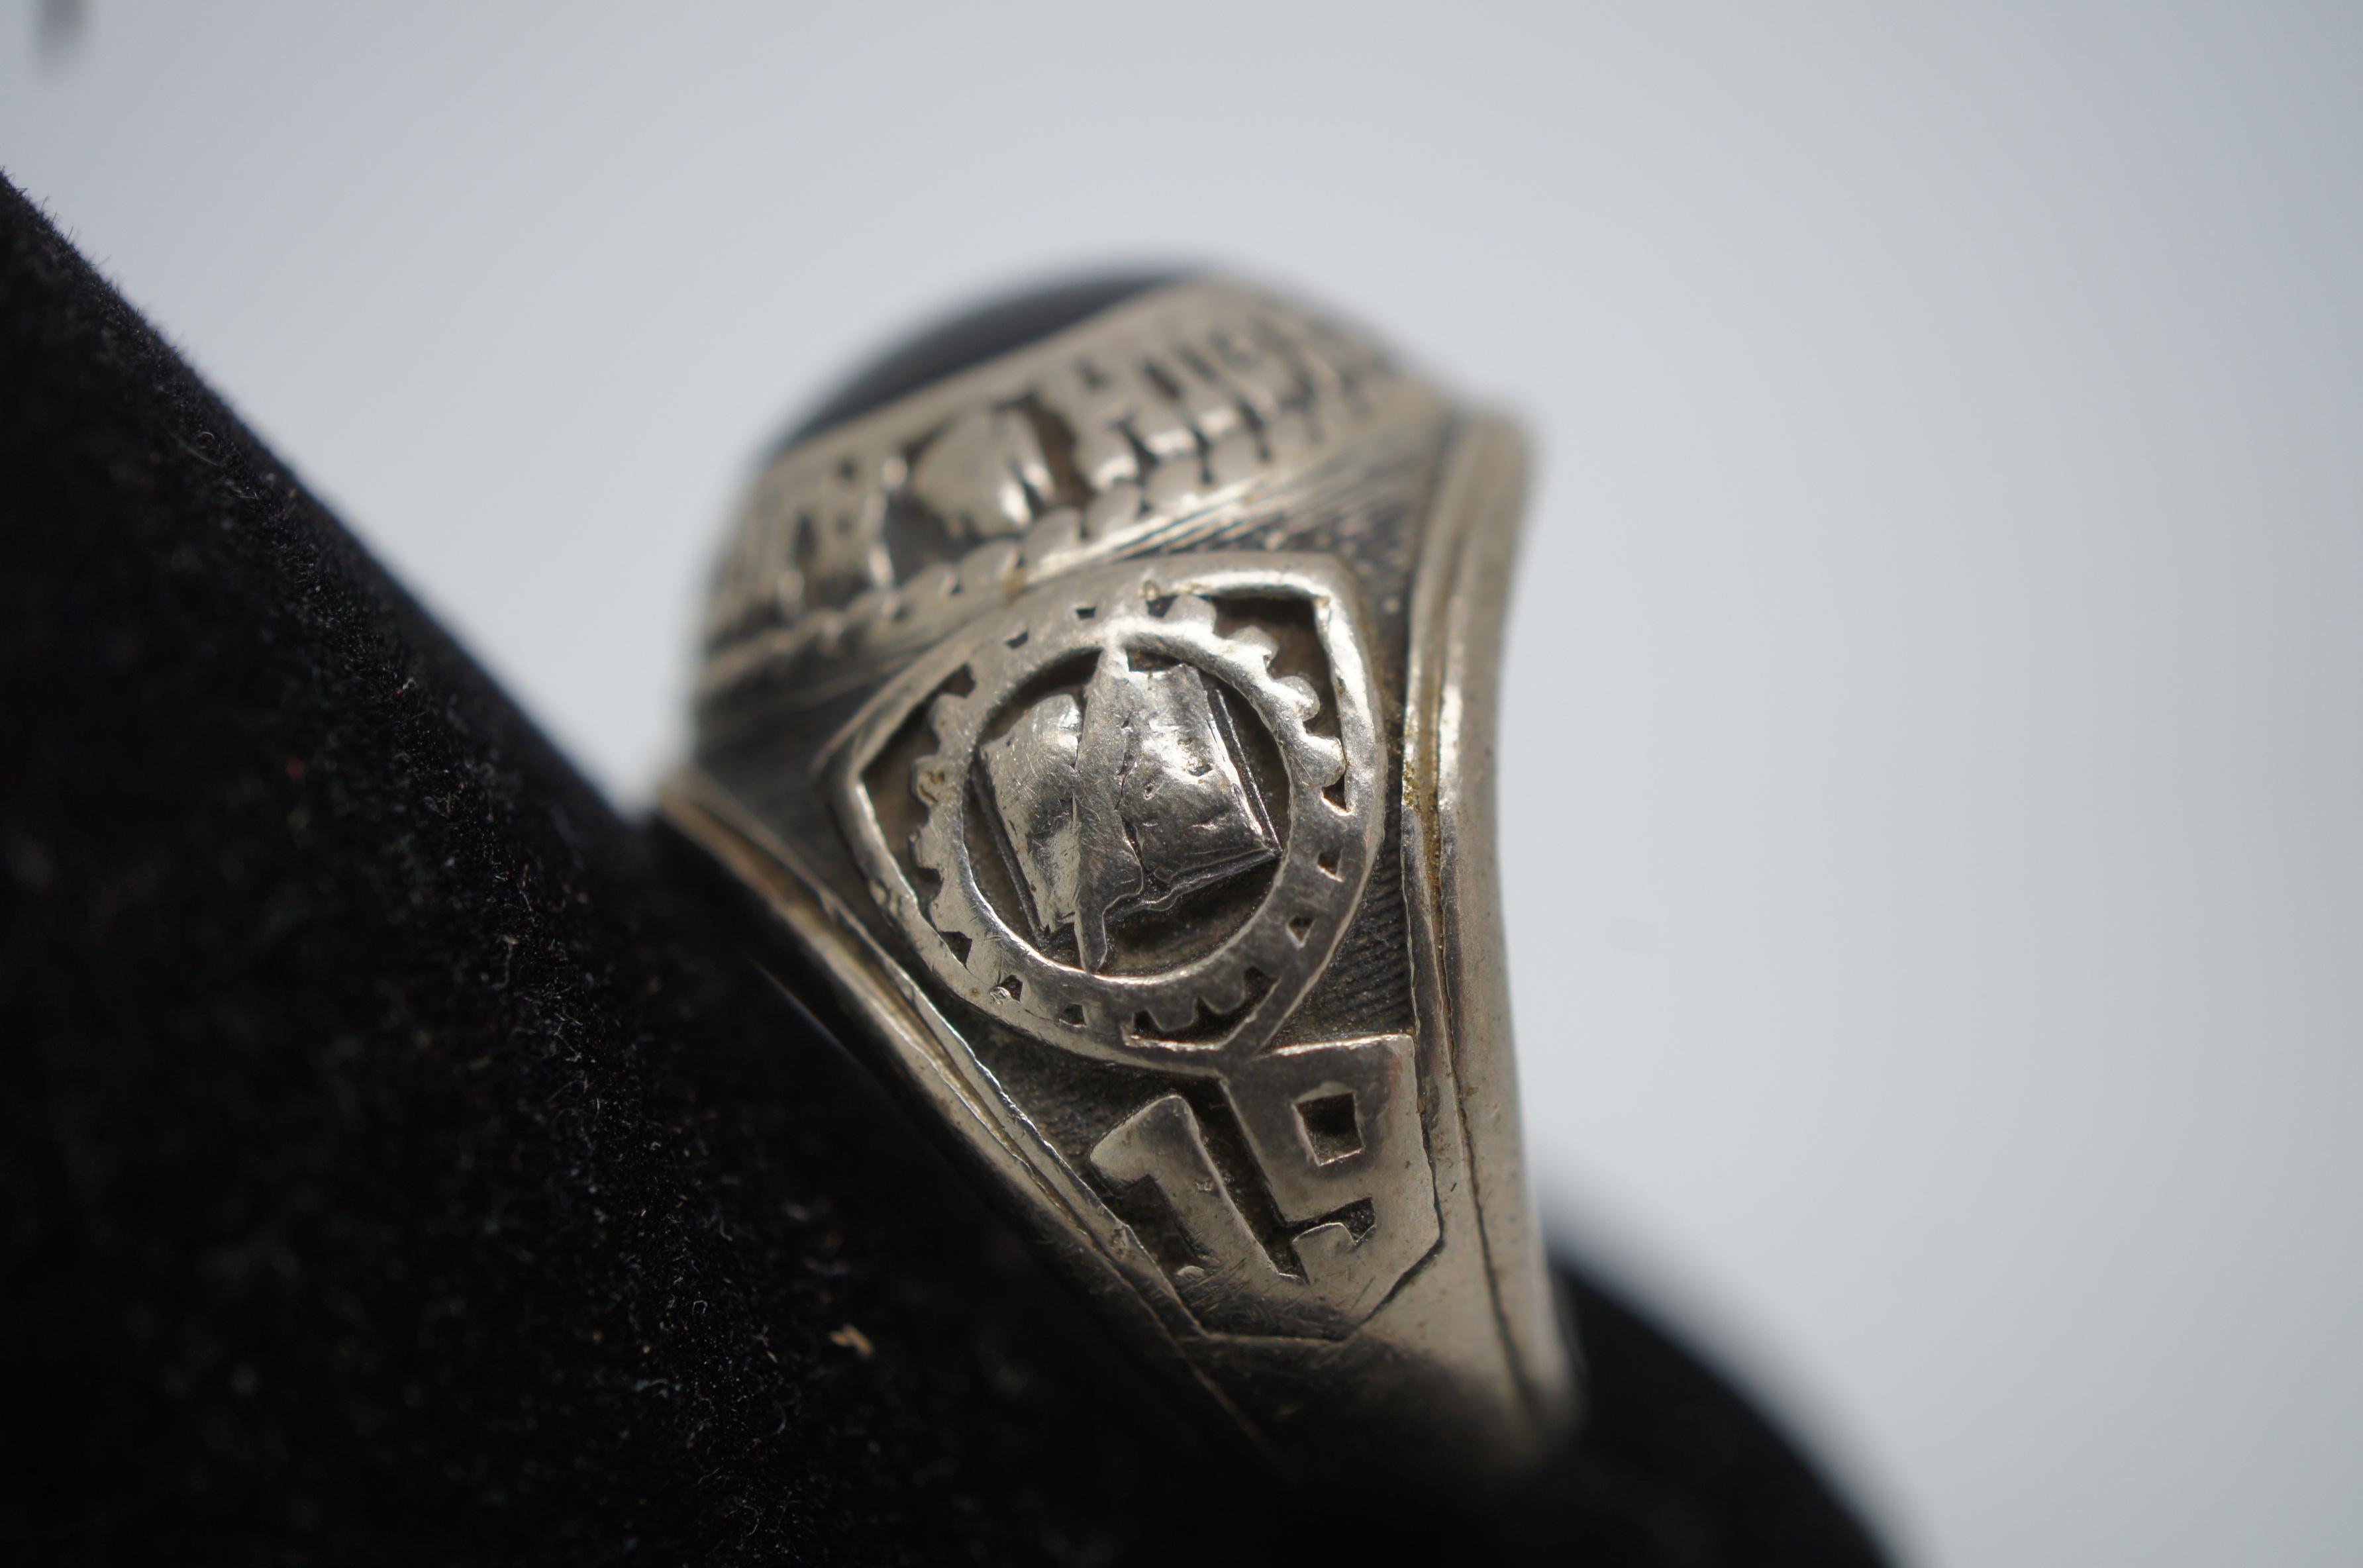 1974 Jostens 10k White Gold 15.5g Class Ring Anderson HS Arrowhead In Good Condition For Sale In Dayton, OH